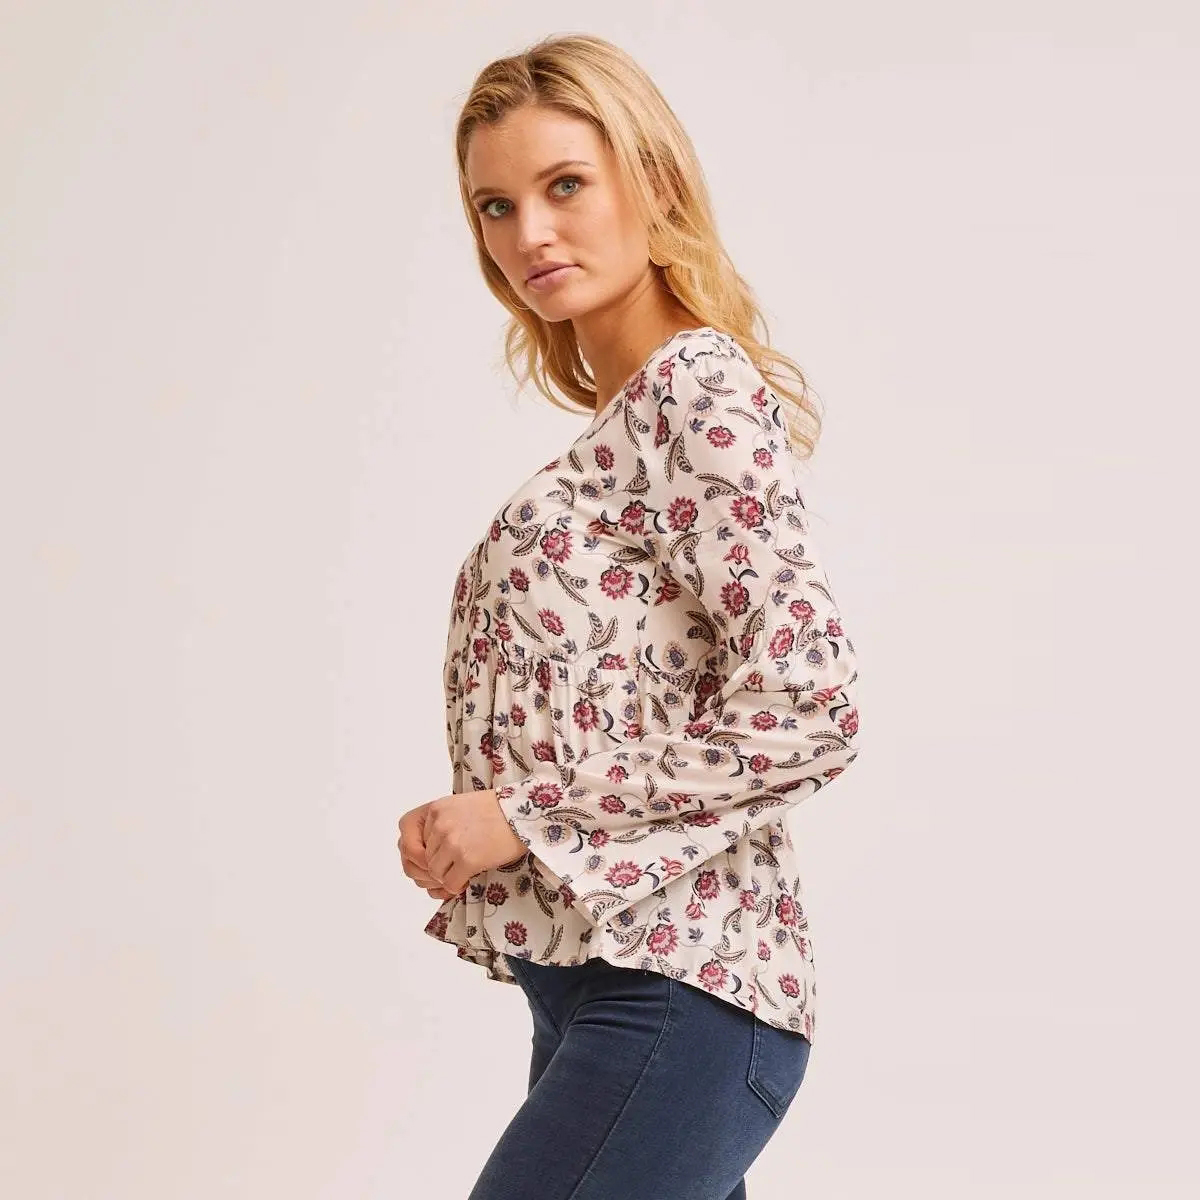 Floral Print Maternity Top For Ladies (3)